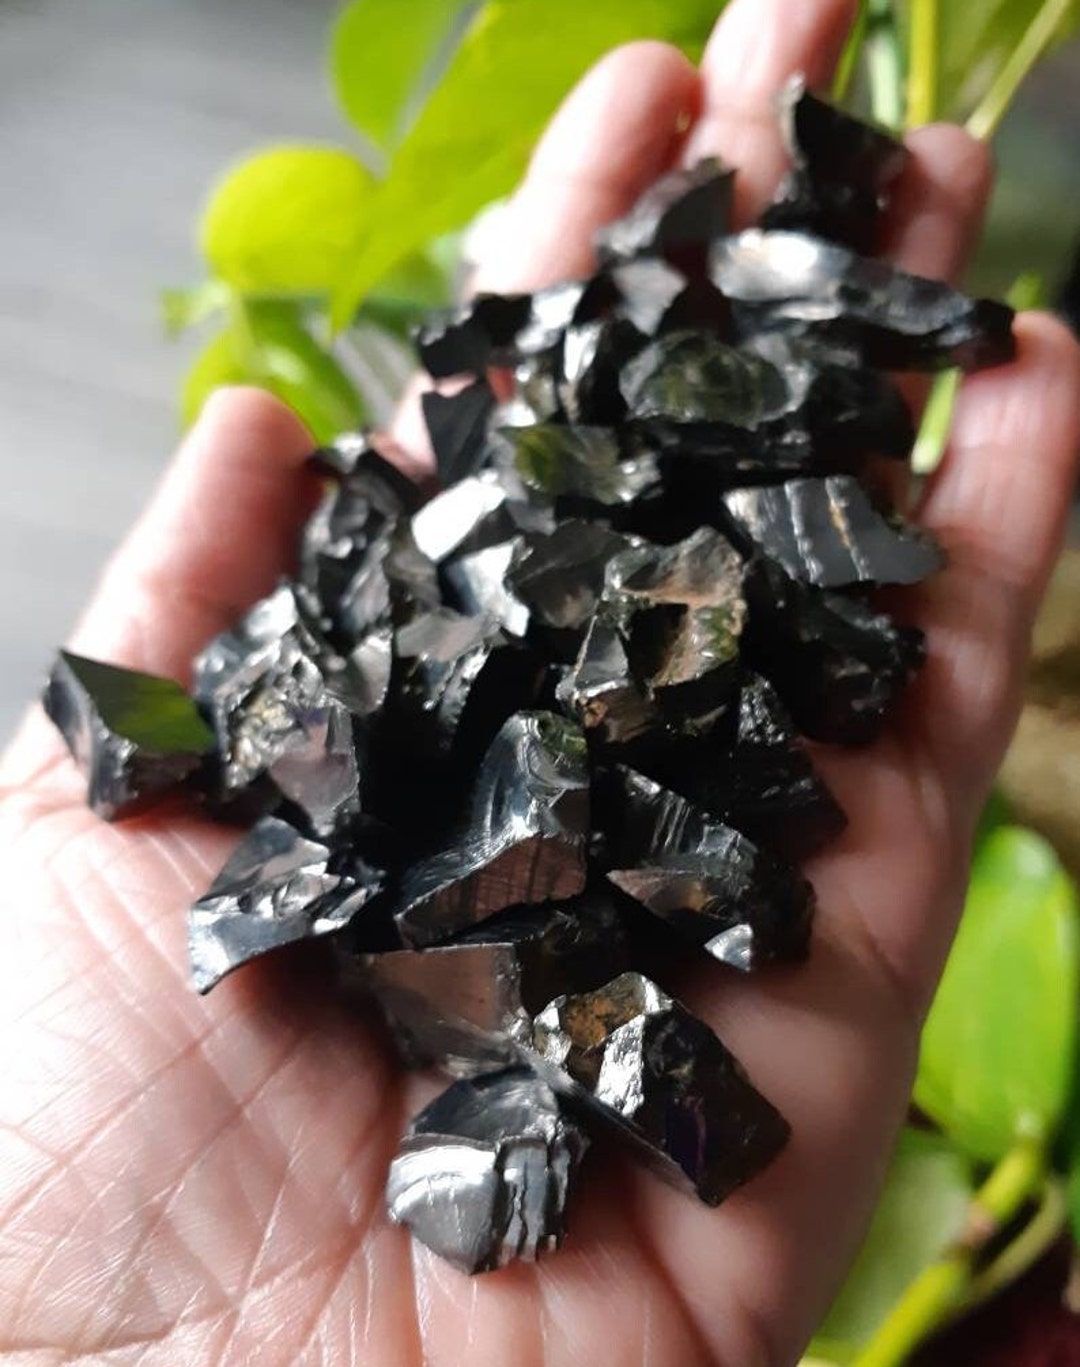 Elite Noble Shungite Genuine High Grade Pure Quality Large Silver Chunky  Raw 2 3.3 Fullerenes Water Purification Conductive 